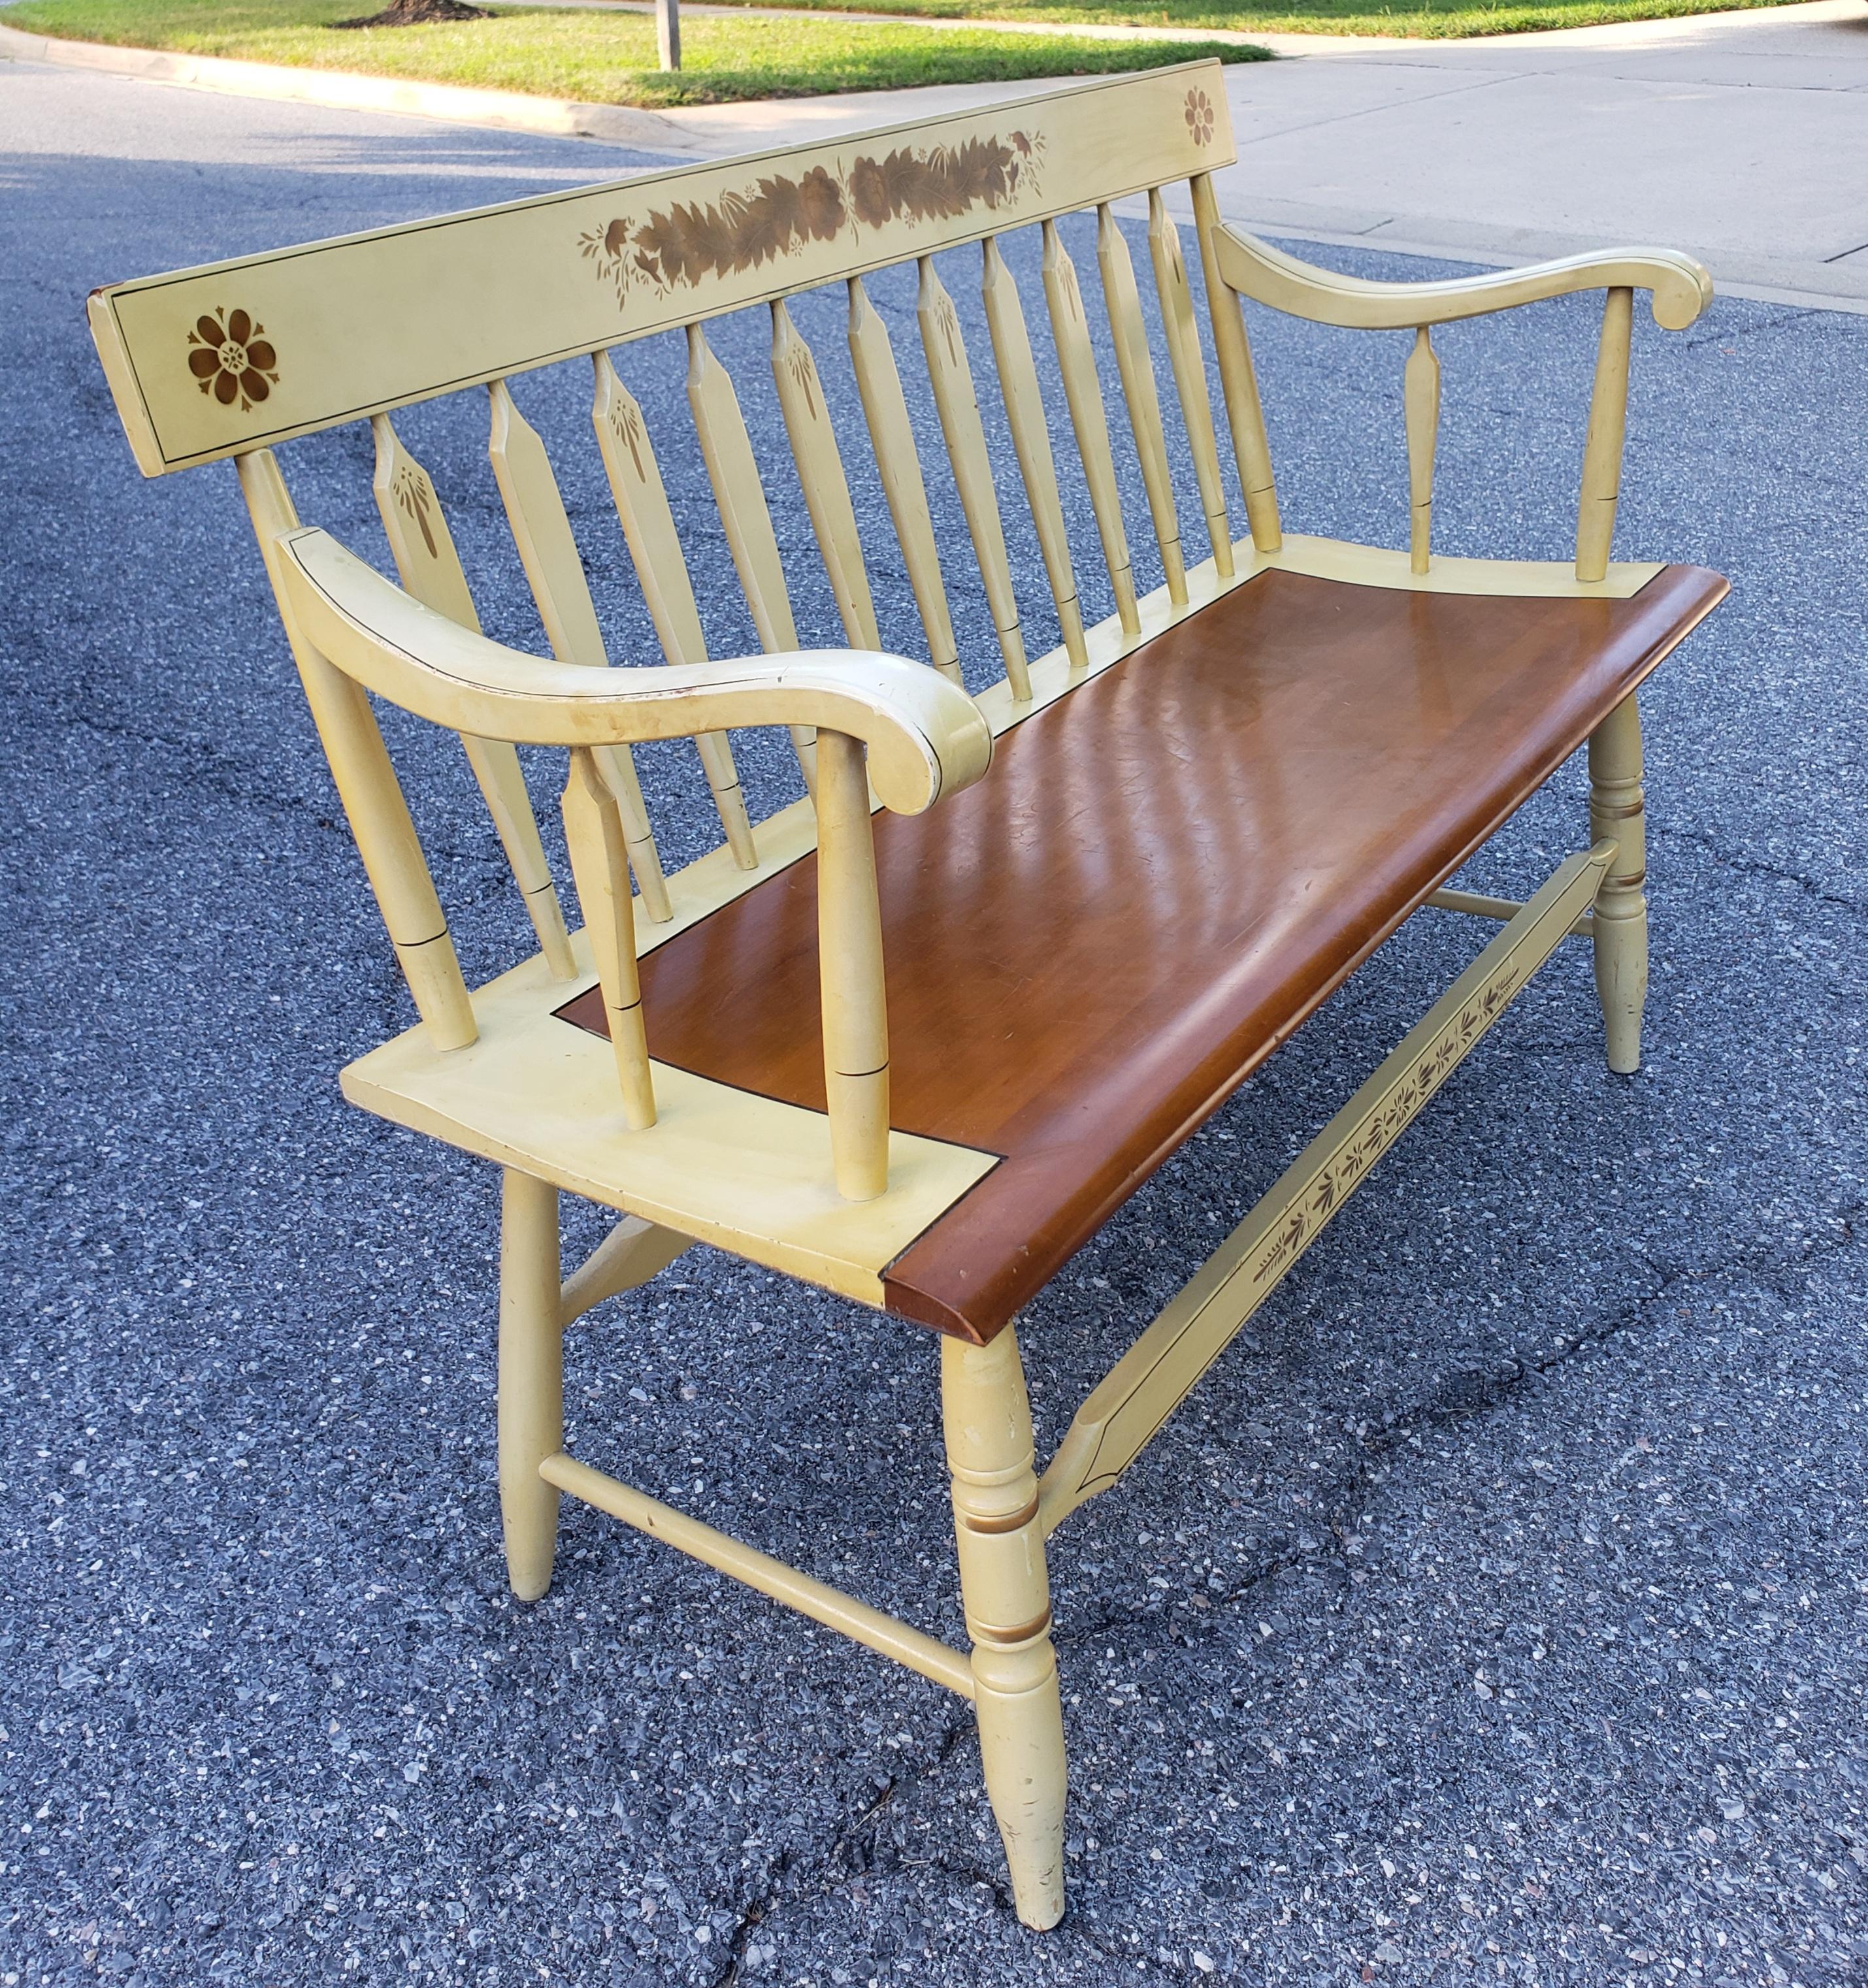 20th Century Hitchcock Painted and Decorated Maple Two-Seater Bench Settee